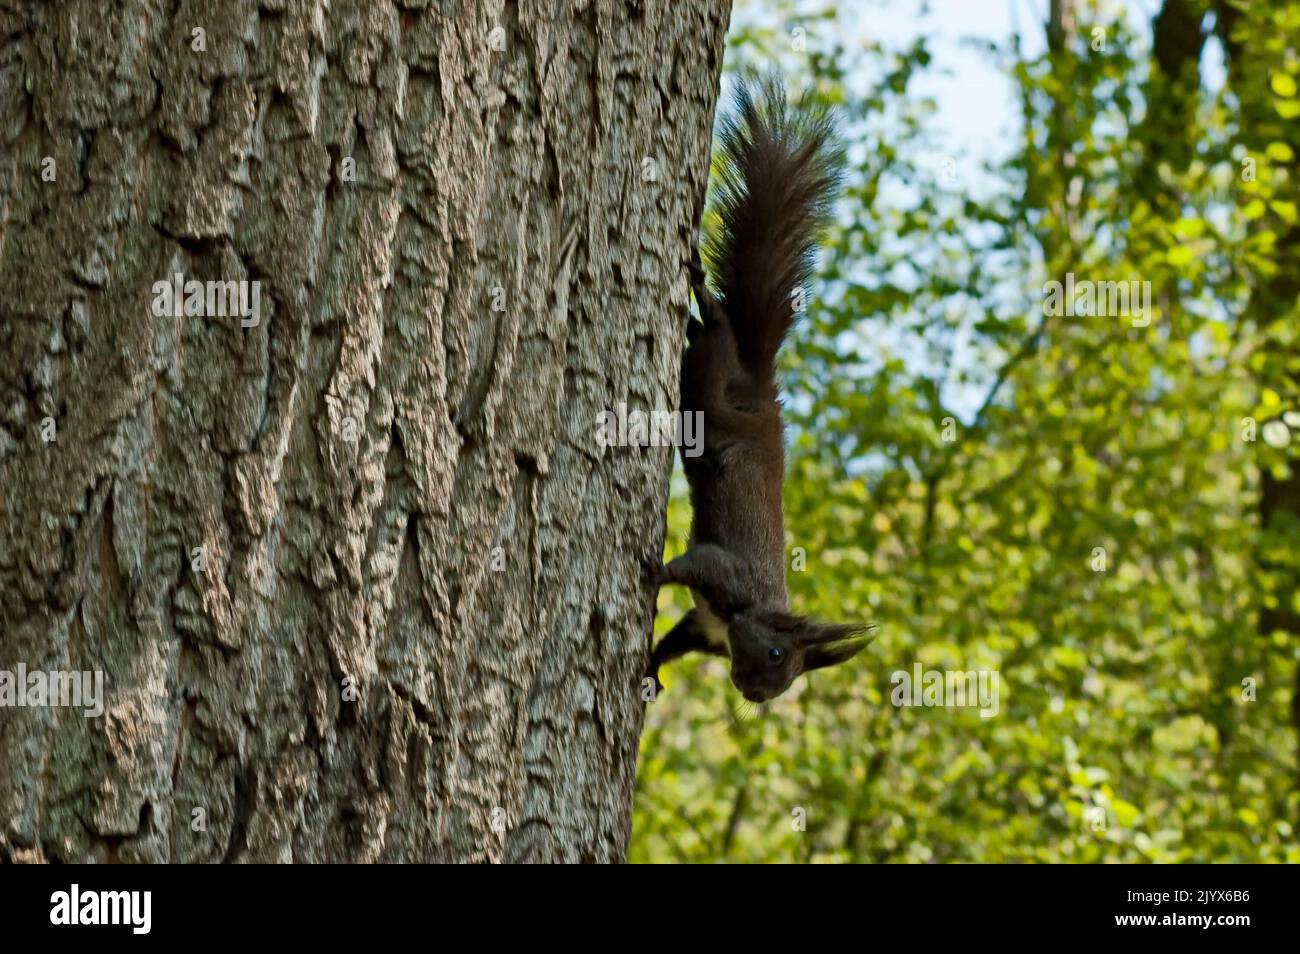 A small gray squirrel is looking for food by going around the trees, Sofia, Bulgaria Stock Photo